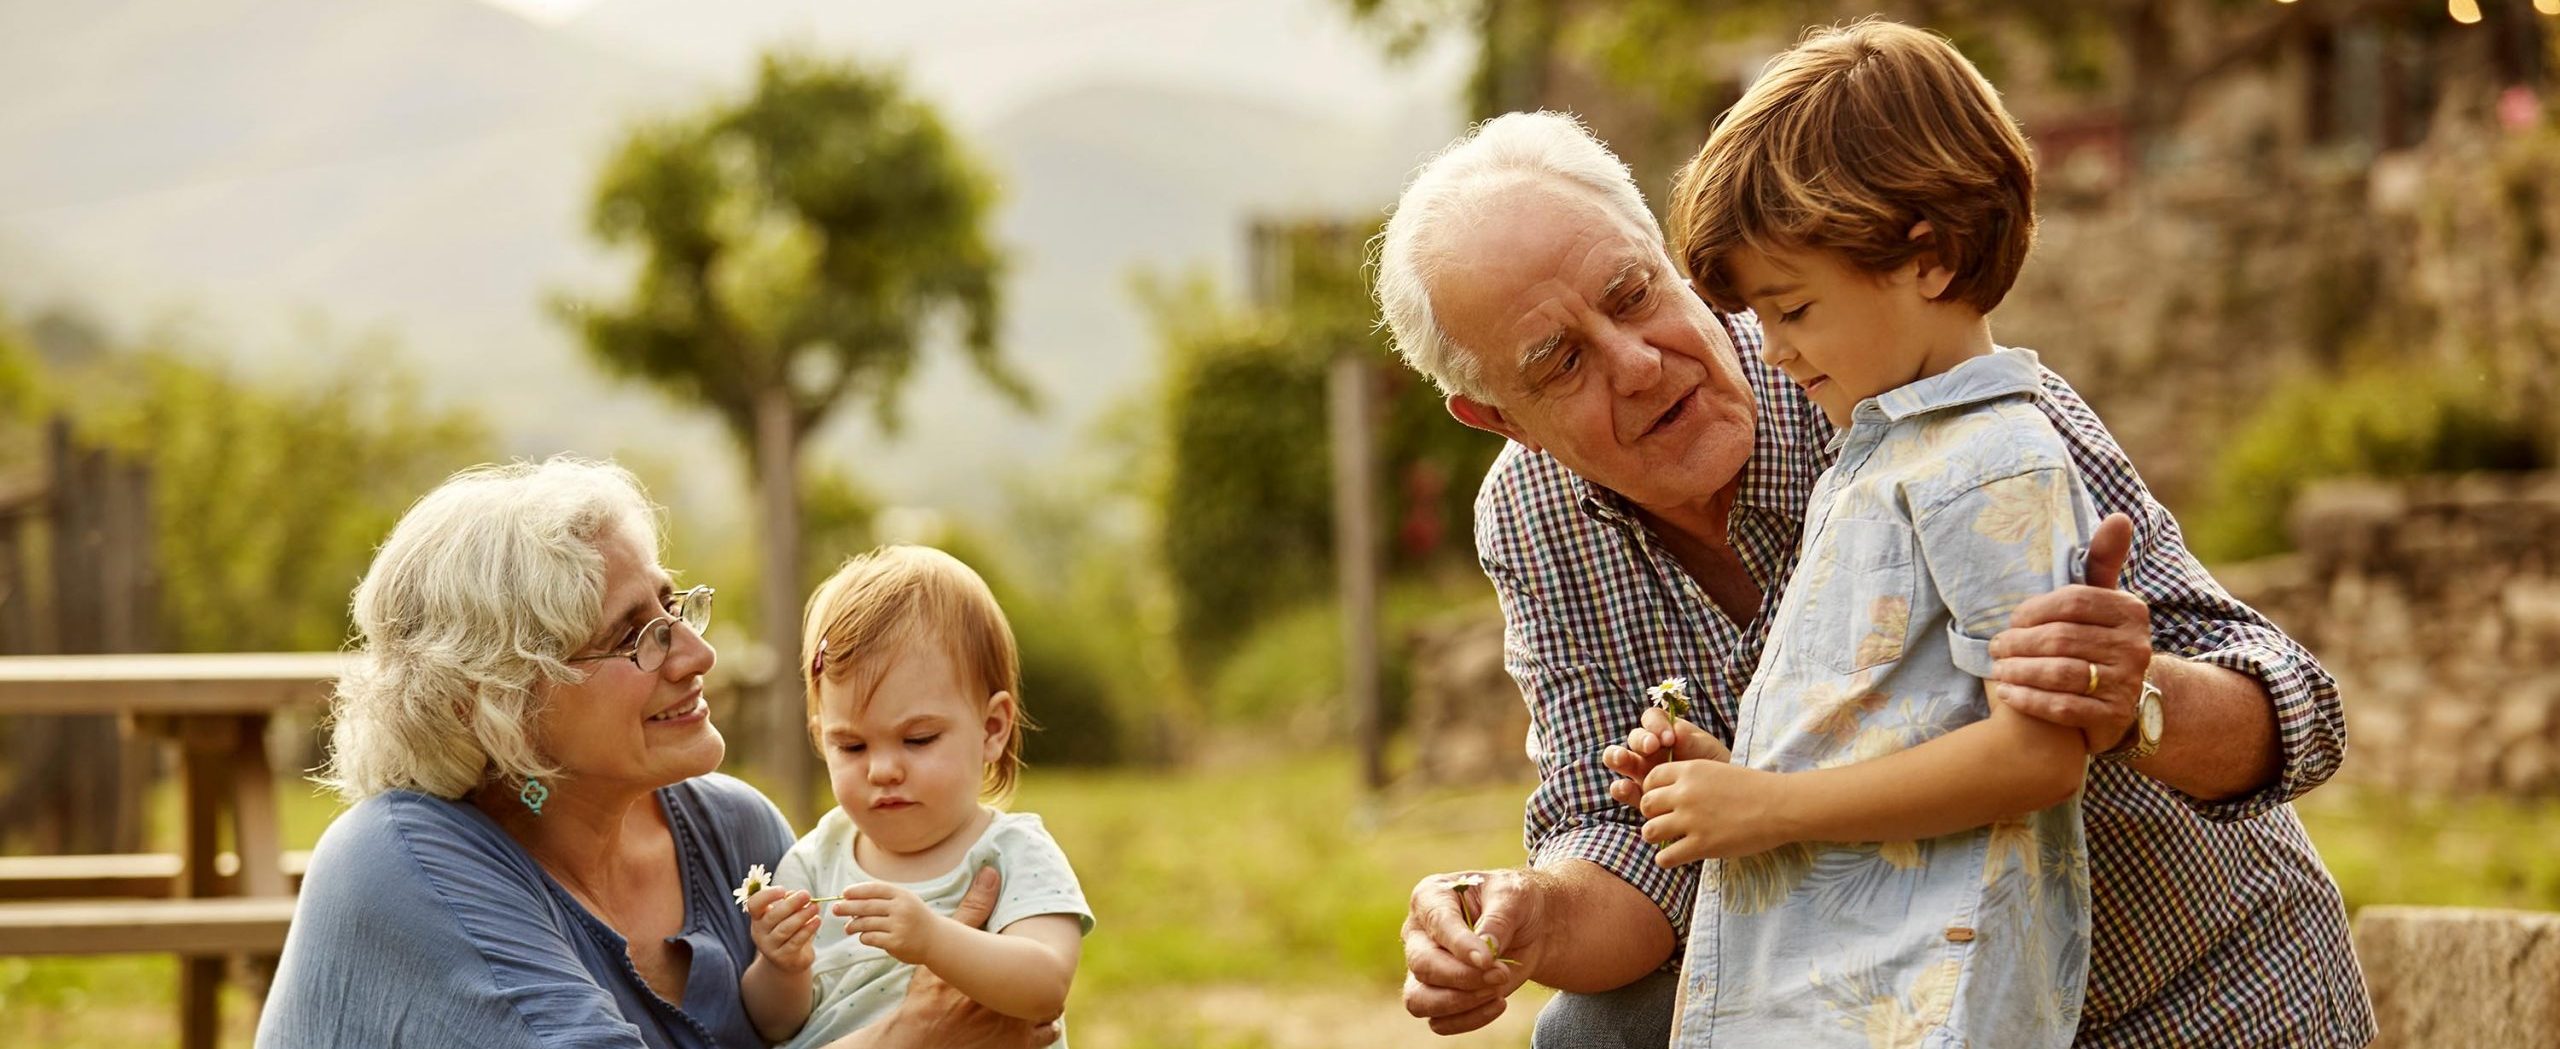 A couple spend time with their grandchildren outside on a sunny day.